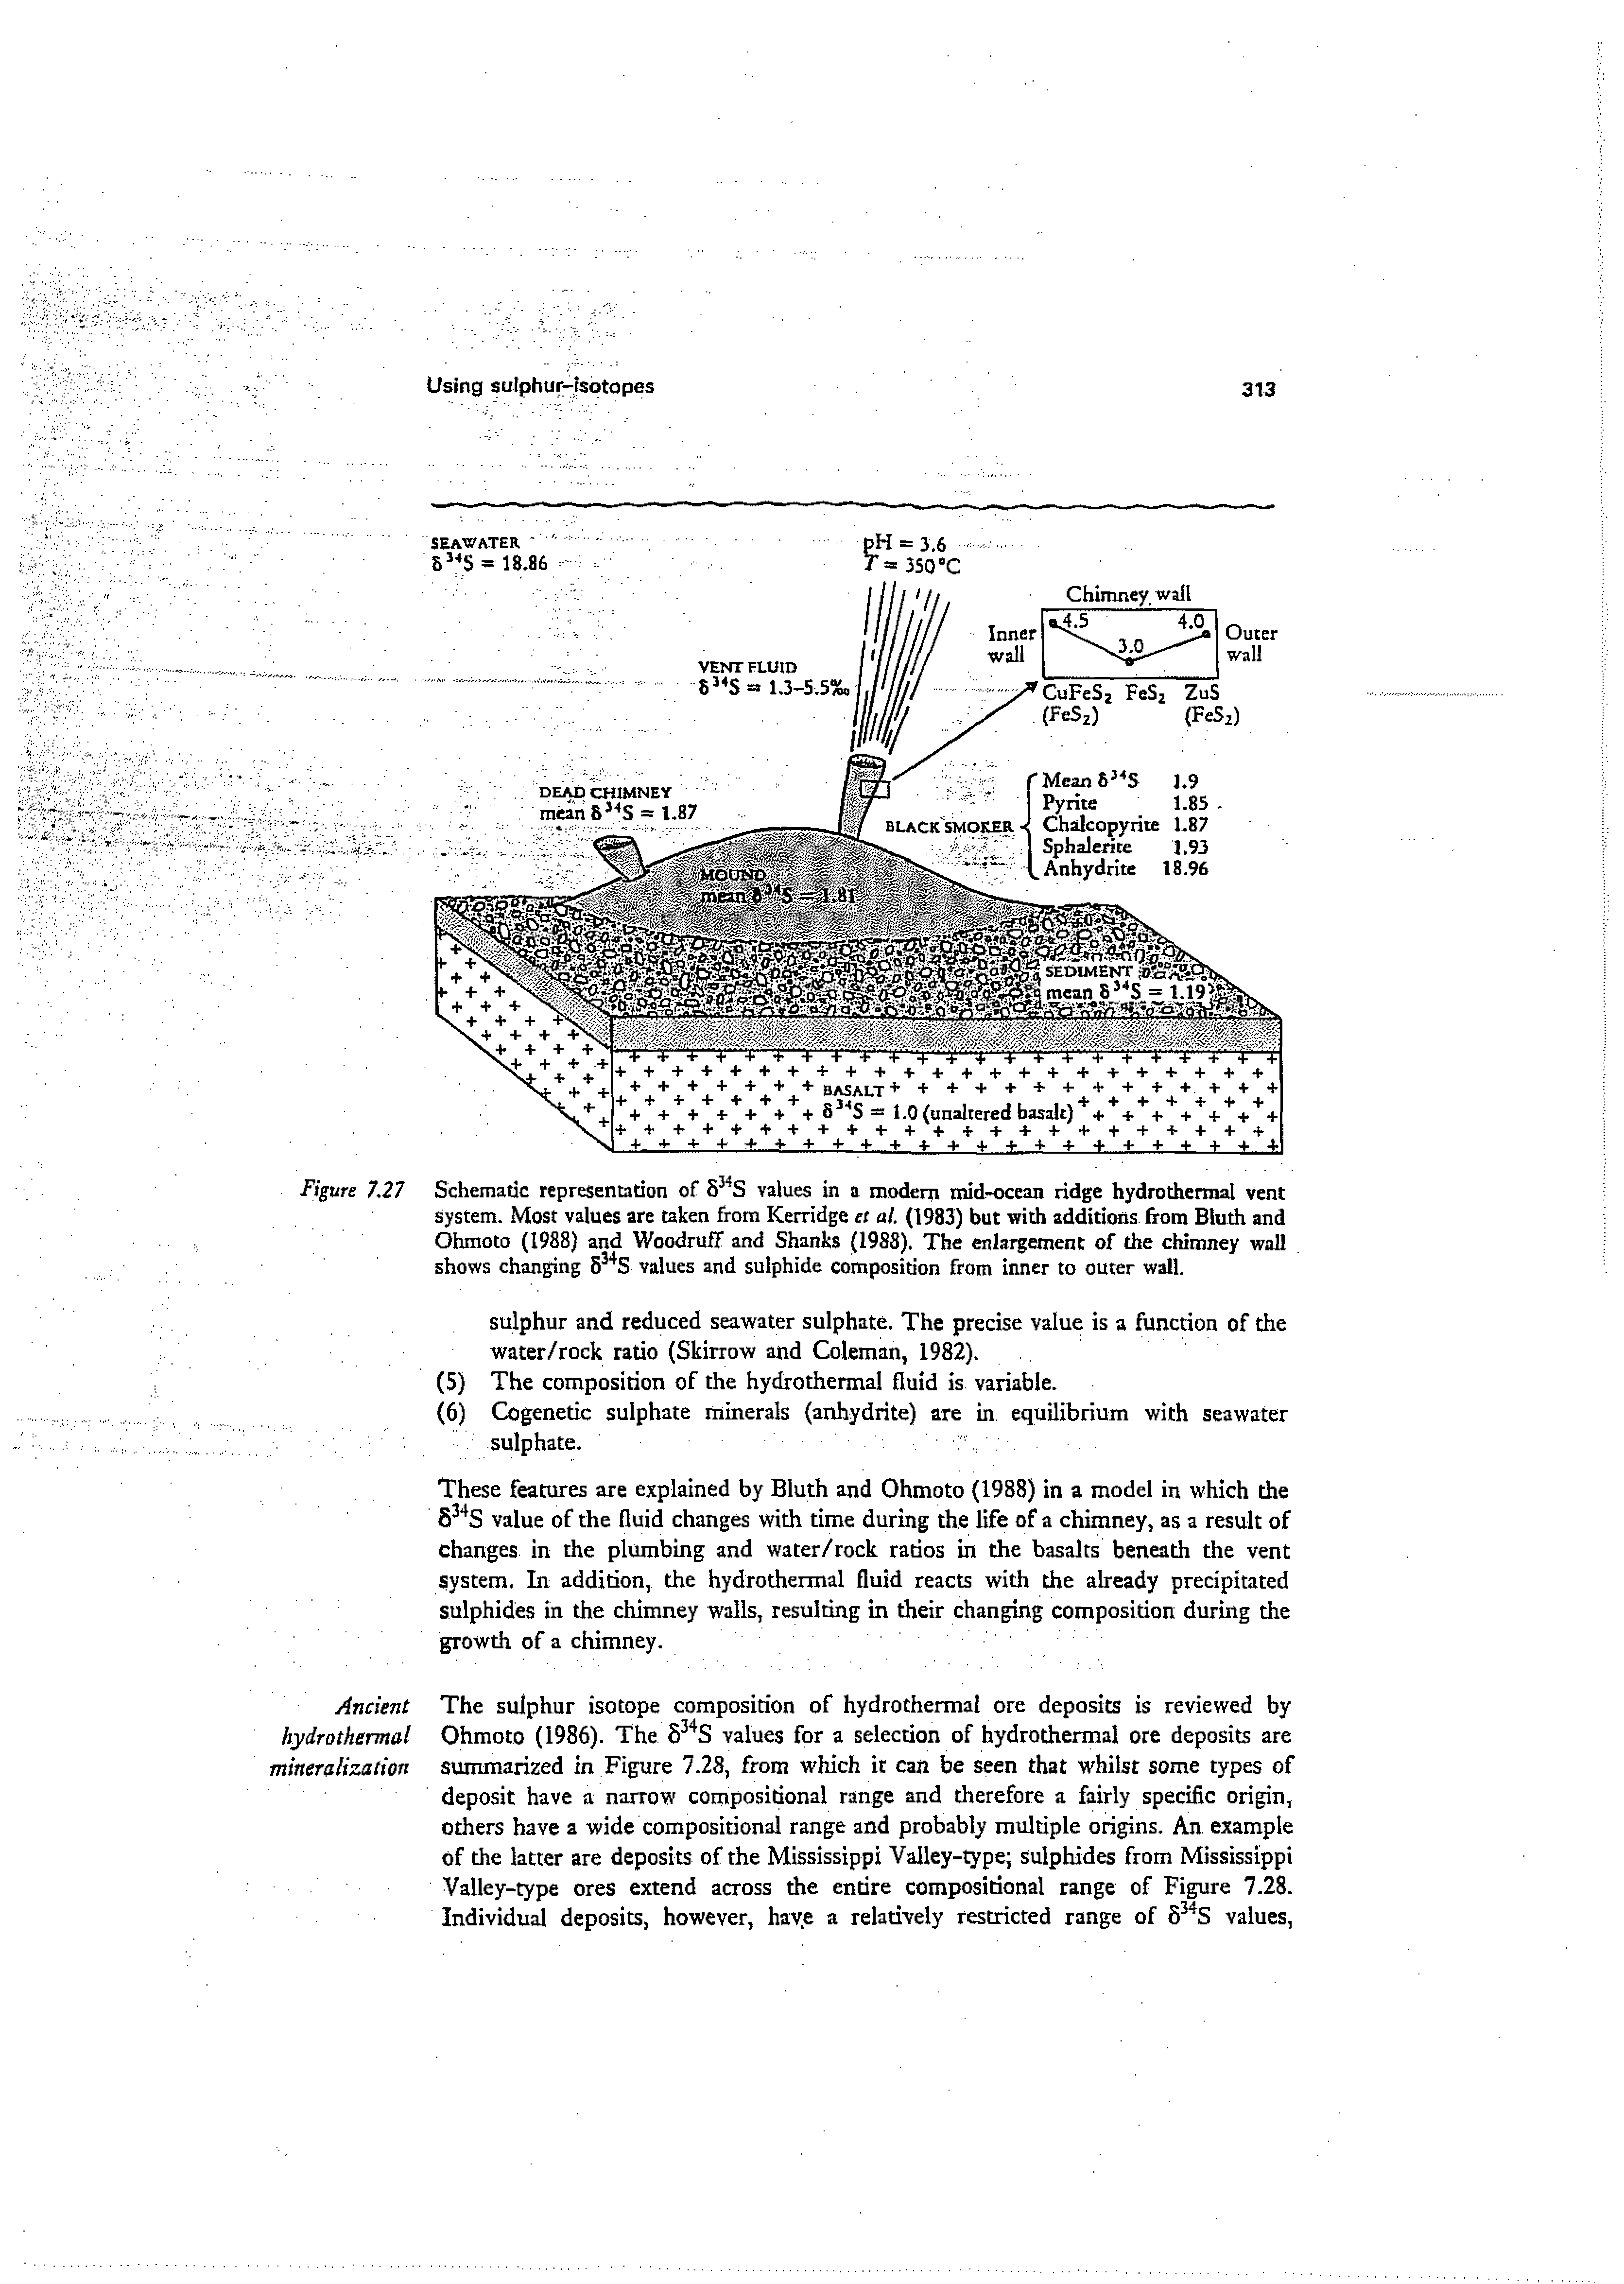 Figure 7,27 Schematic representation of 5 S values in a modern mid KJcean ridge hydrothermal vent system. Most values are taken from Kerridge cr al. (1983) but with additions, from Btuth and Ohmoto (1988) and Woodruff and Shanks (1988). The enlargement of the chimney wall shows changing 5 S values and sulphide composition from inner to outer wall.